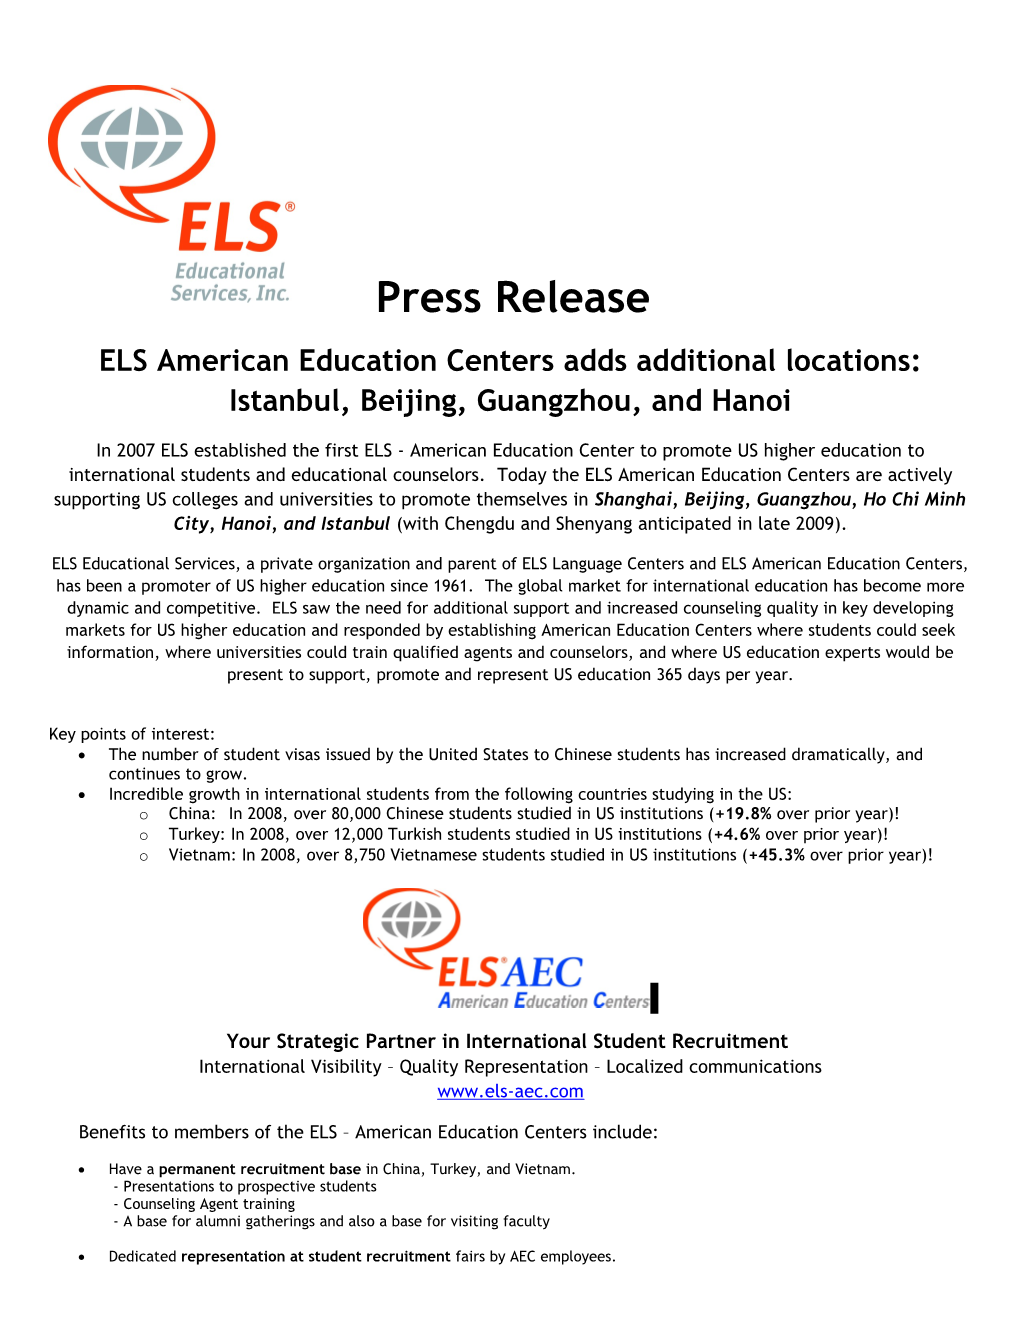 ELS American Education Centers Adds Additional Locations: Istanbul, Beijing, Guangzhou